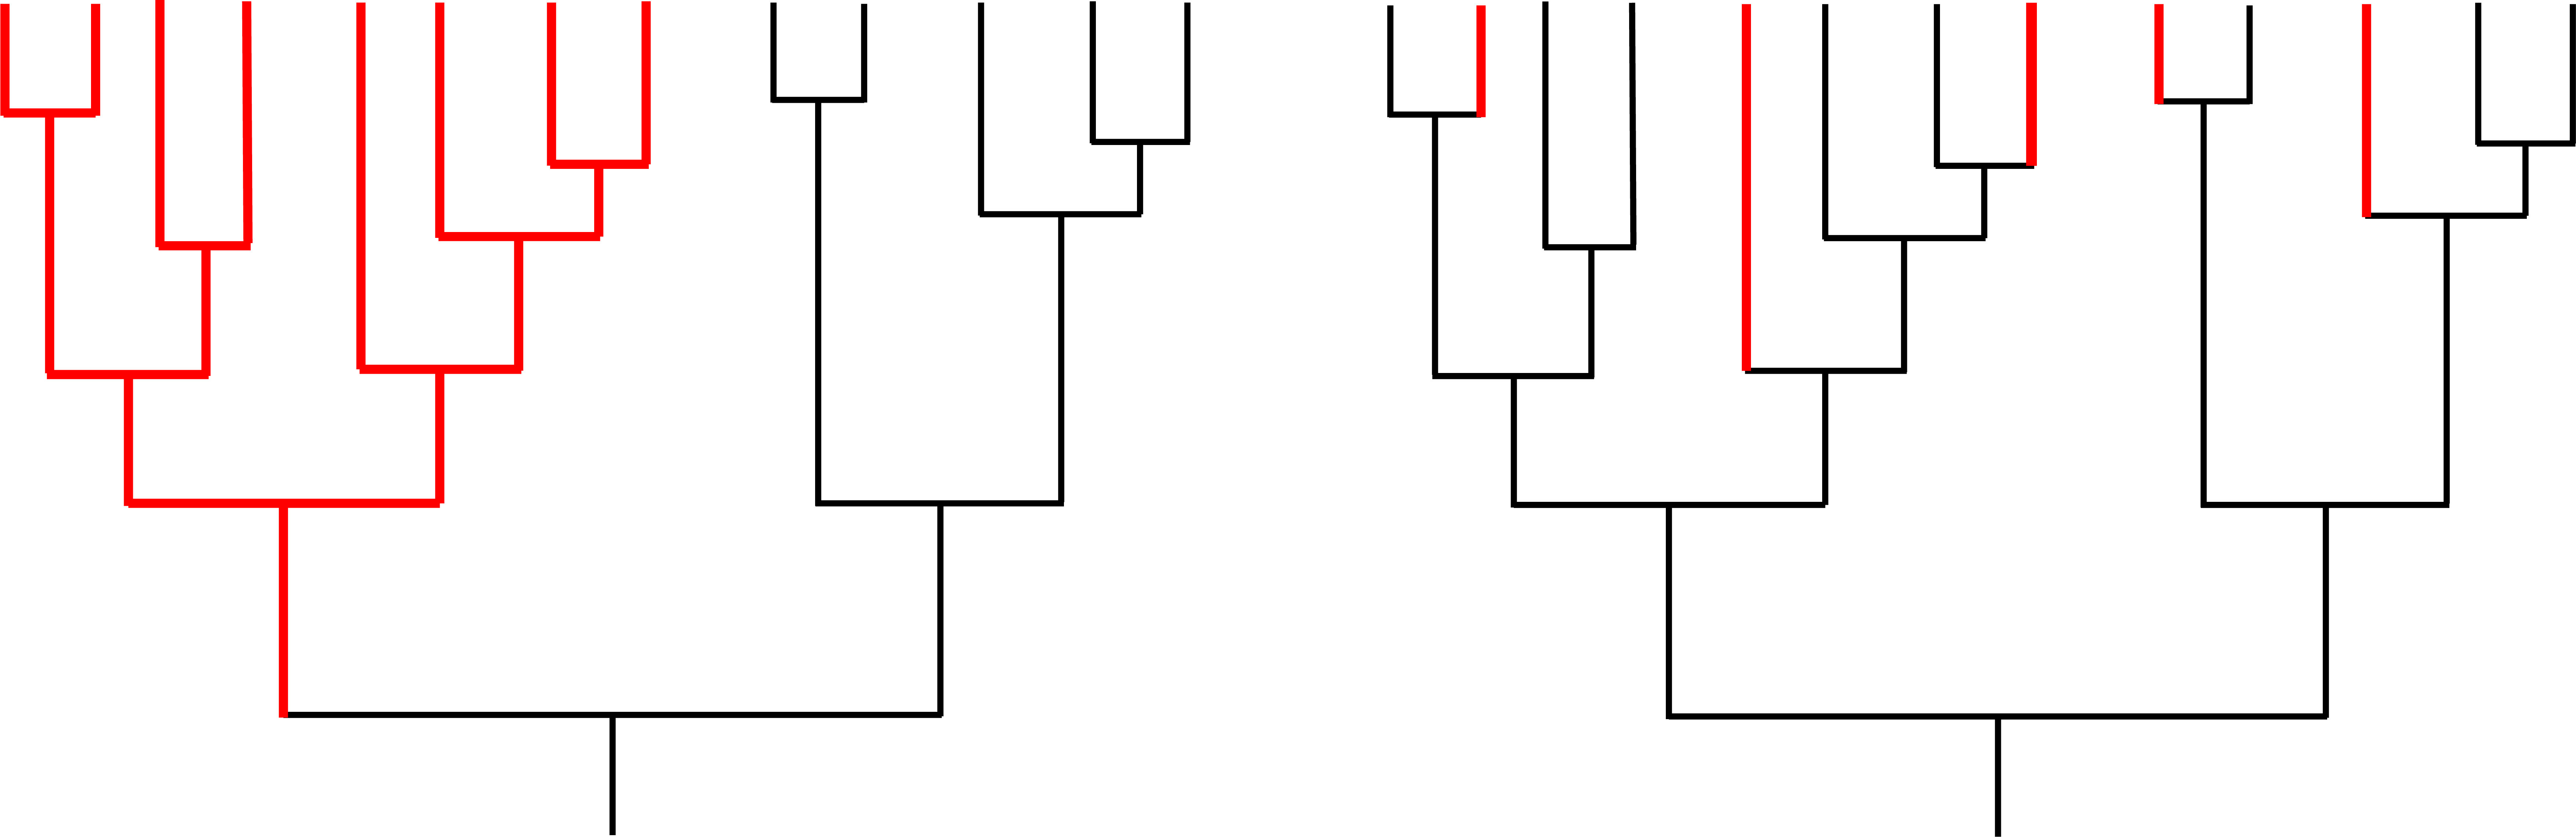 Two hypothetical examples of diversification in a group of closely related species. Black indicates presence of the ancestral condition (e.g., planktotrophic development); red indicates presence of a derived condition (e.g., nonplanktotrophic development). In the example on the left, the origin of the derived condition has caused an increased rate of speciation within a single clade, providing evidence for species selection. In the example on the right, the derived condition has originated multiple times, but there is no evidence that the origin of the trait has increased the speciation rate; therefore, there is not any evidence for species selection. Image based in part on fig. 1 in Duda and Palumbi (1999).